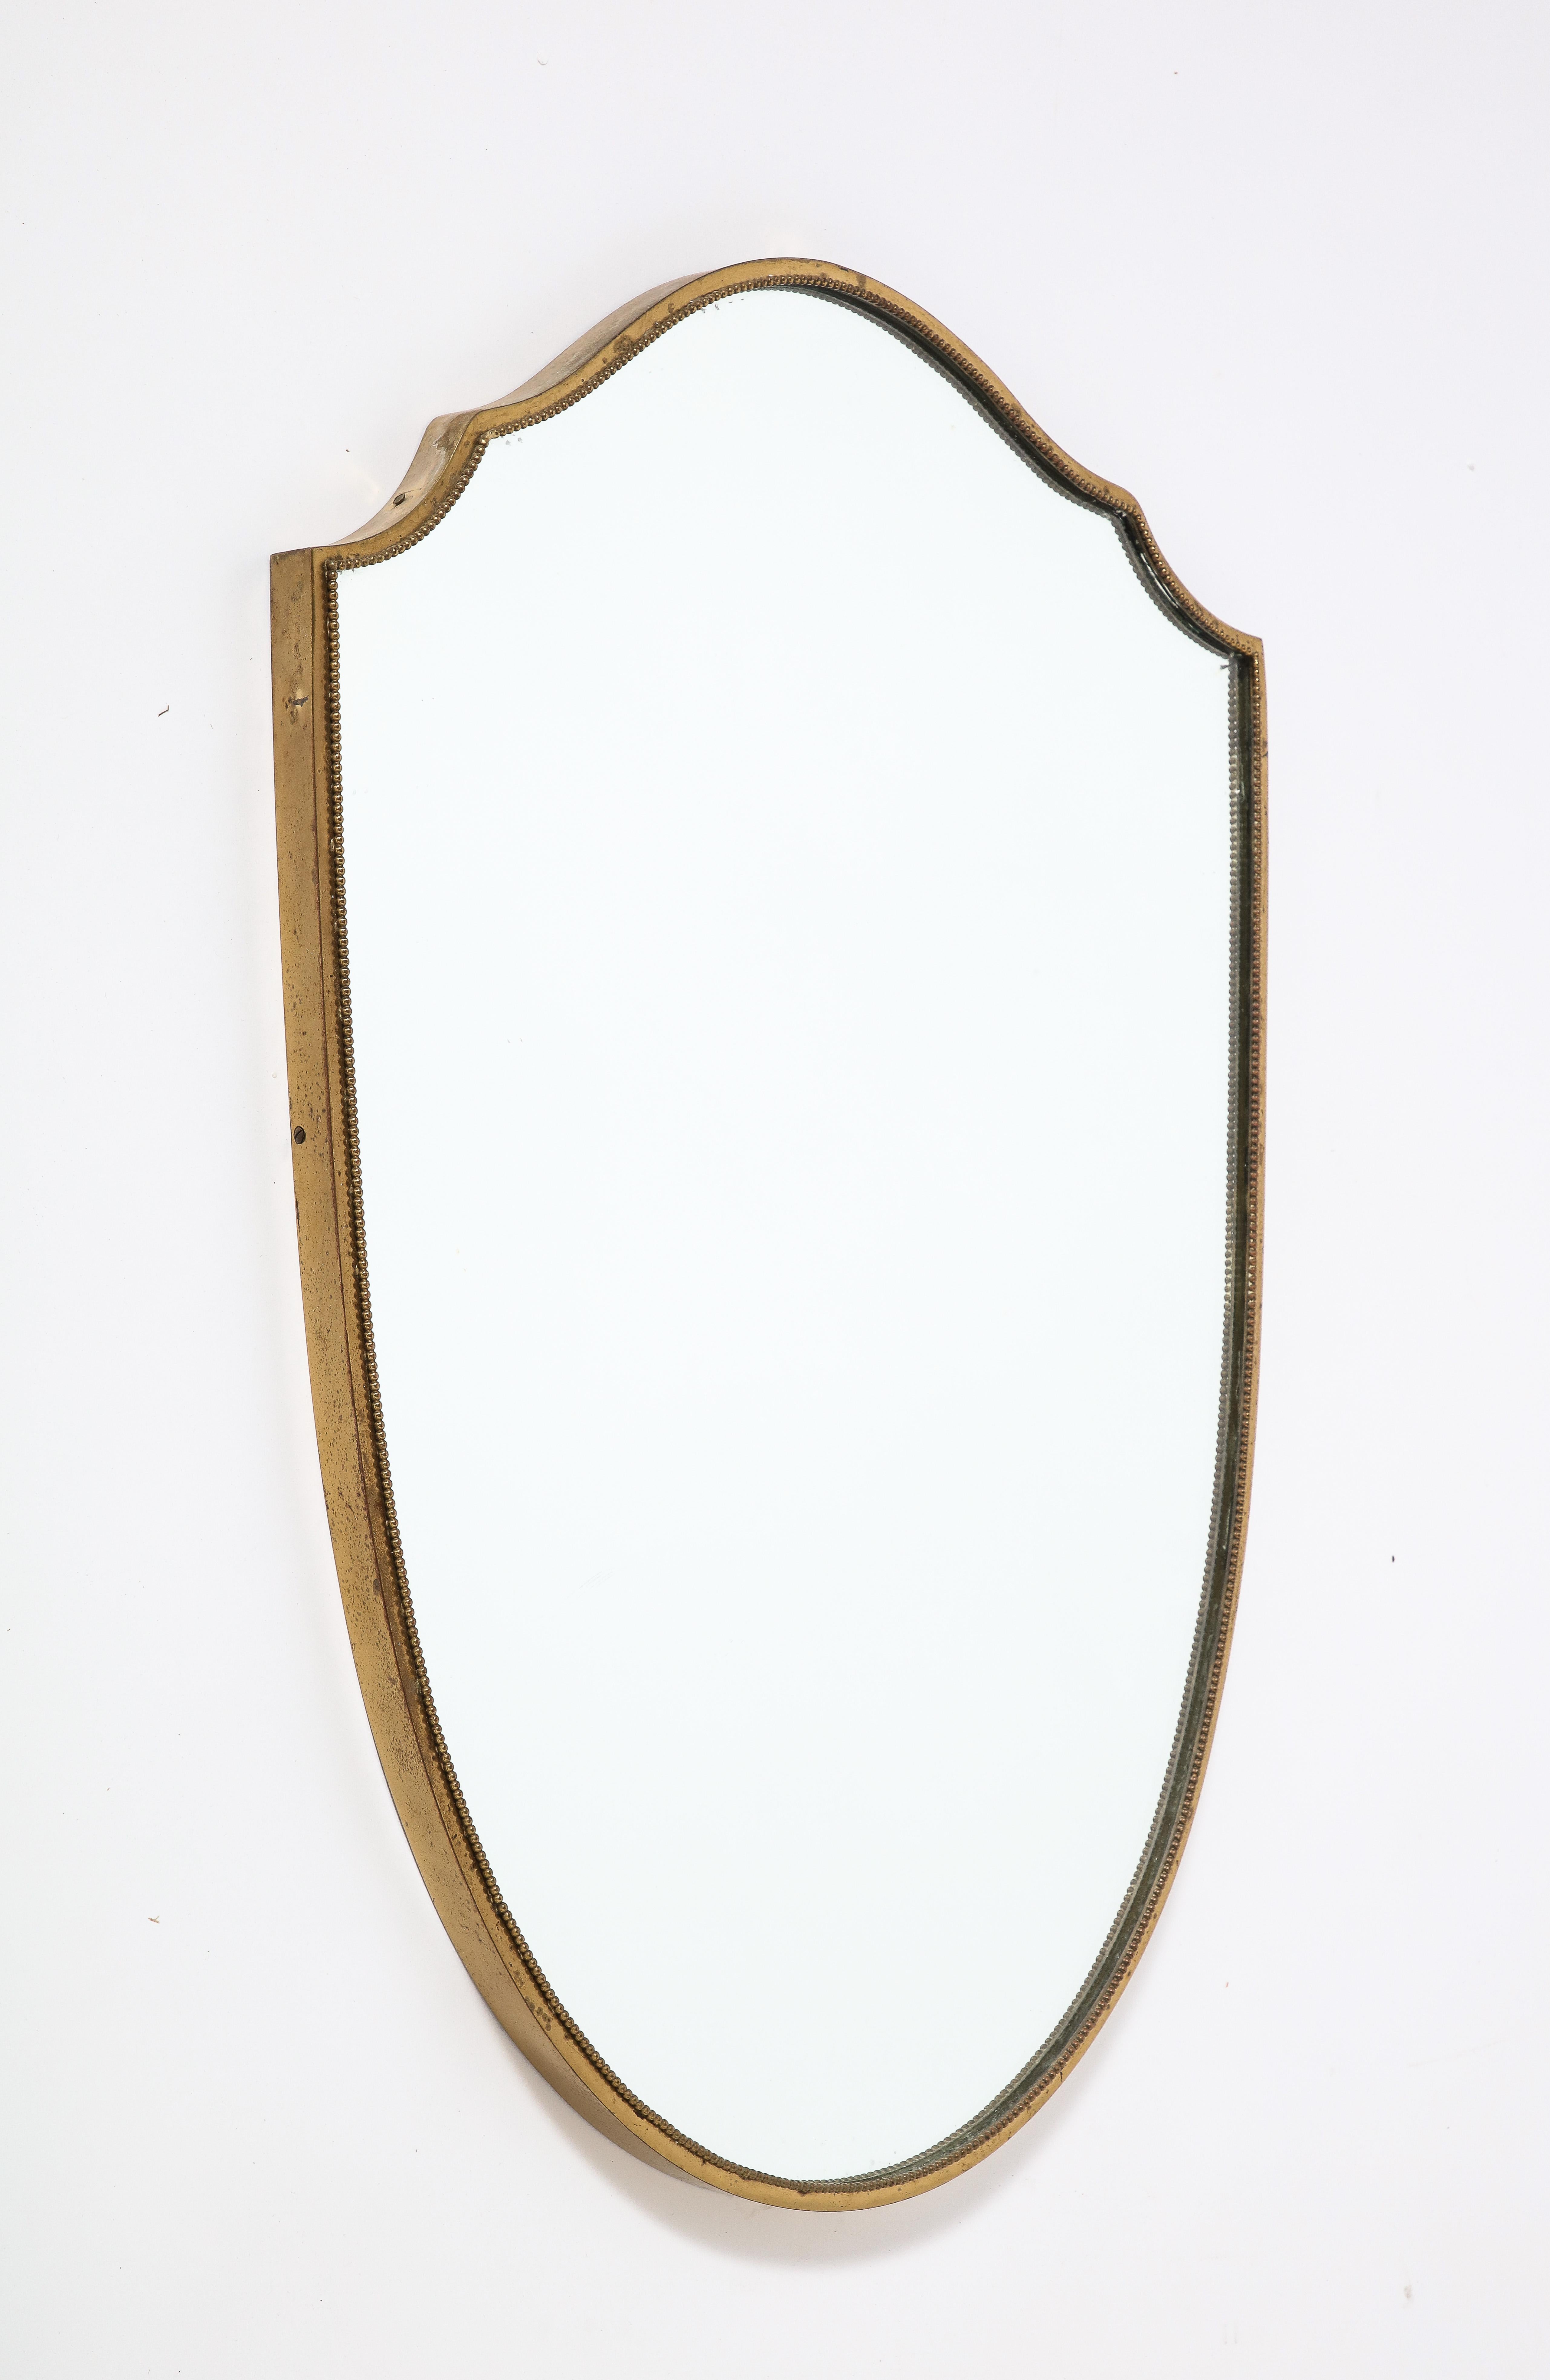 An Italian 1940's brass shield shaped mirror with beaded trim; the brass with a warm patina, mirror glass plate original. 
Italy, circa 1940 
Size: 31 1/2